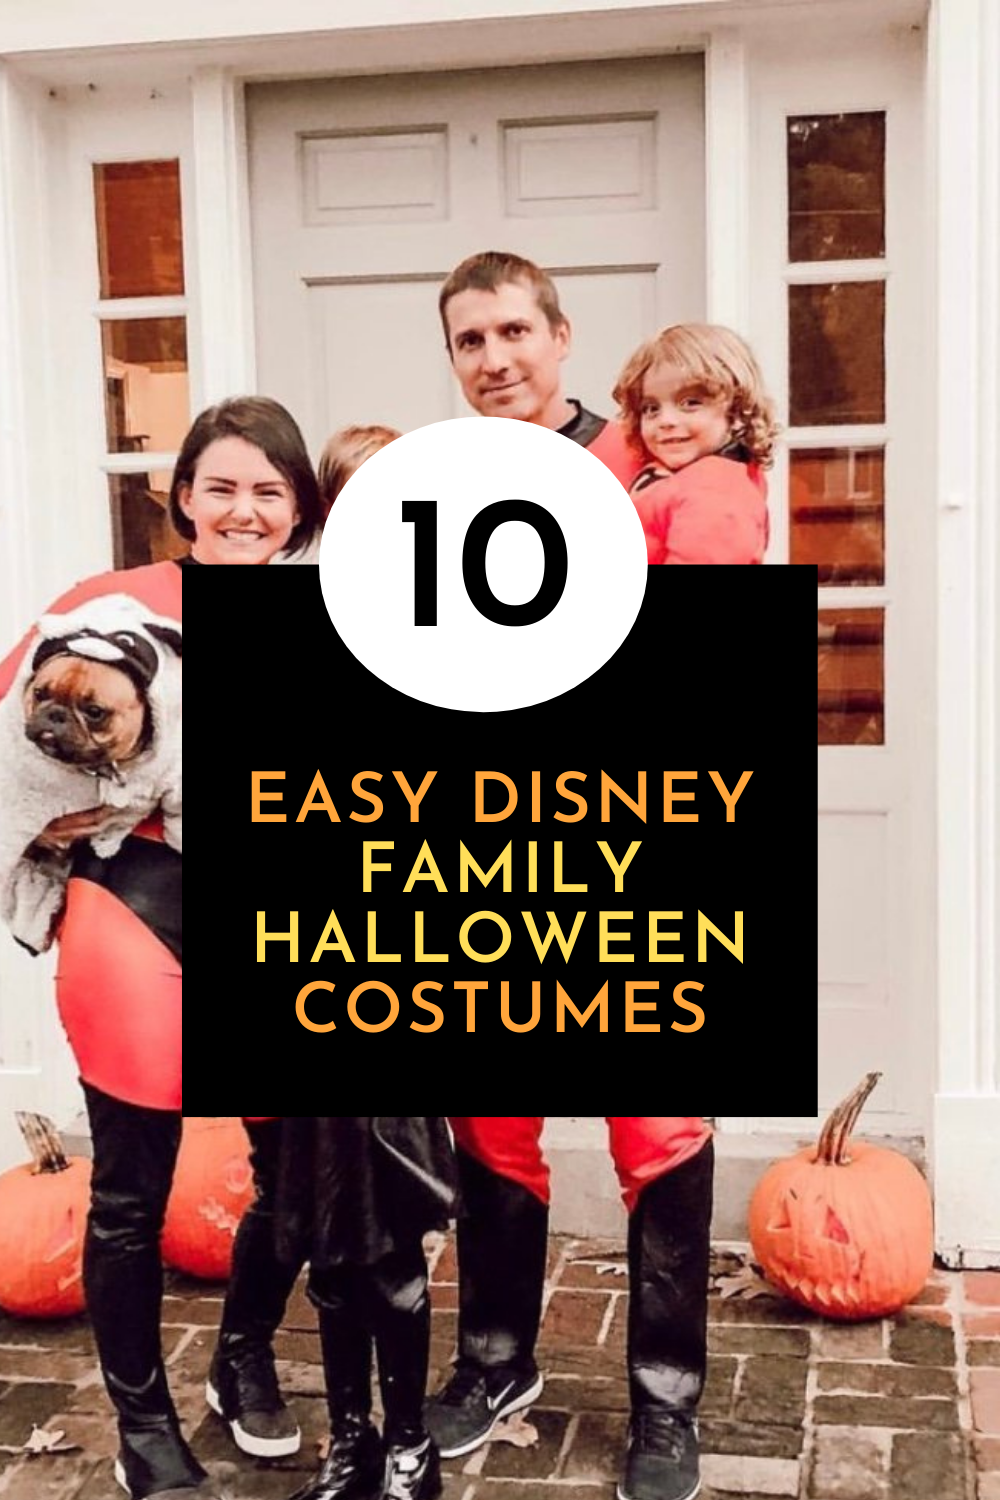 Easy Disney Family Halloween Costumes by Very Easy Makeup